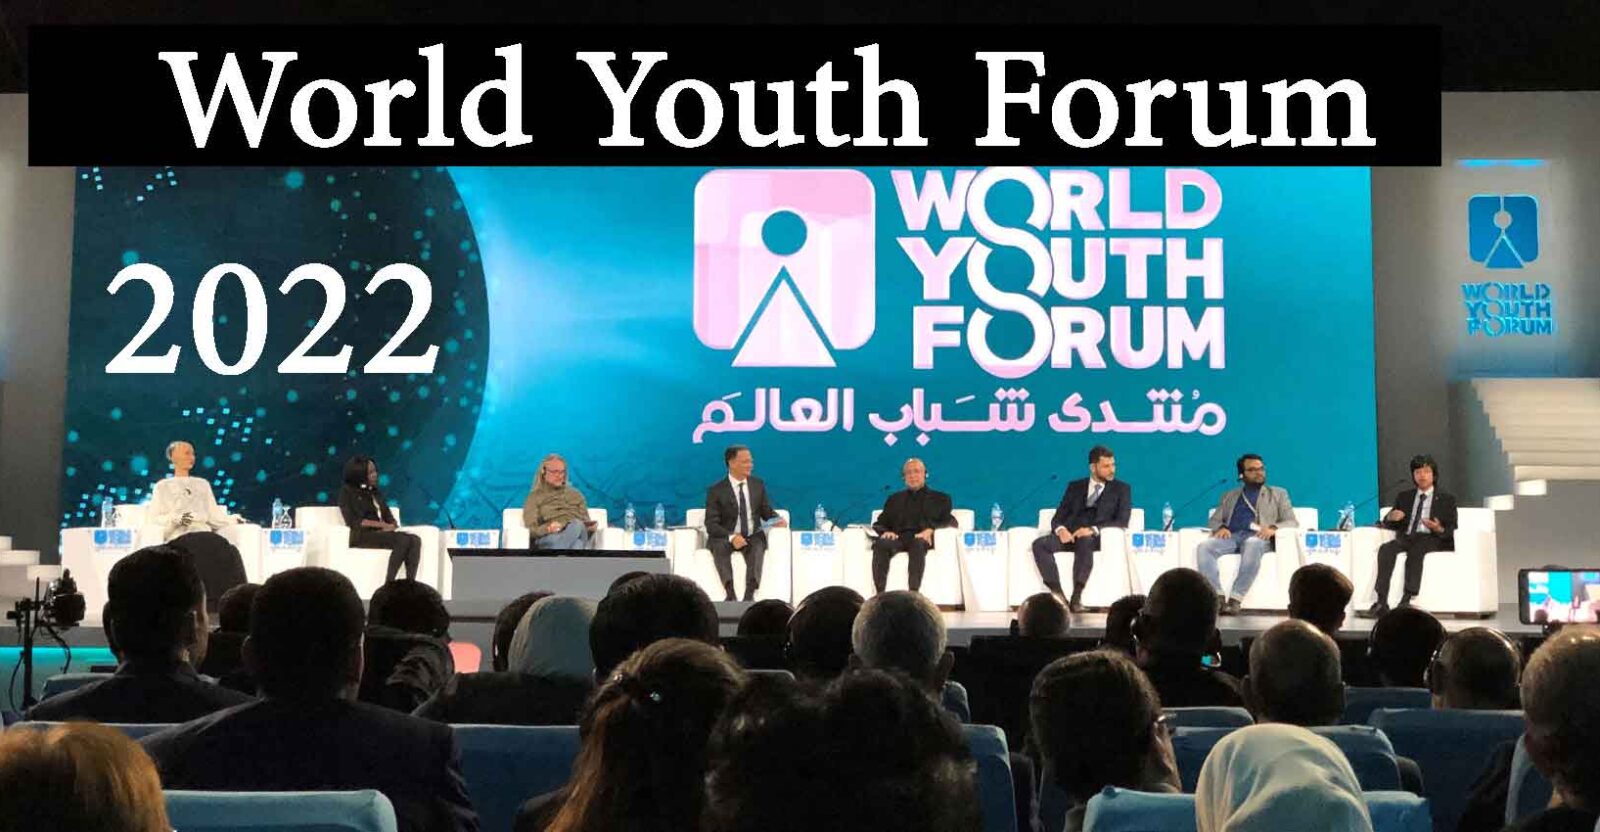 WORLD YOUTH FORUM (WYF) 2022 FOR YOUNG LEADERS FULLY FUNDED TO EGYPT